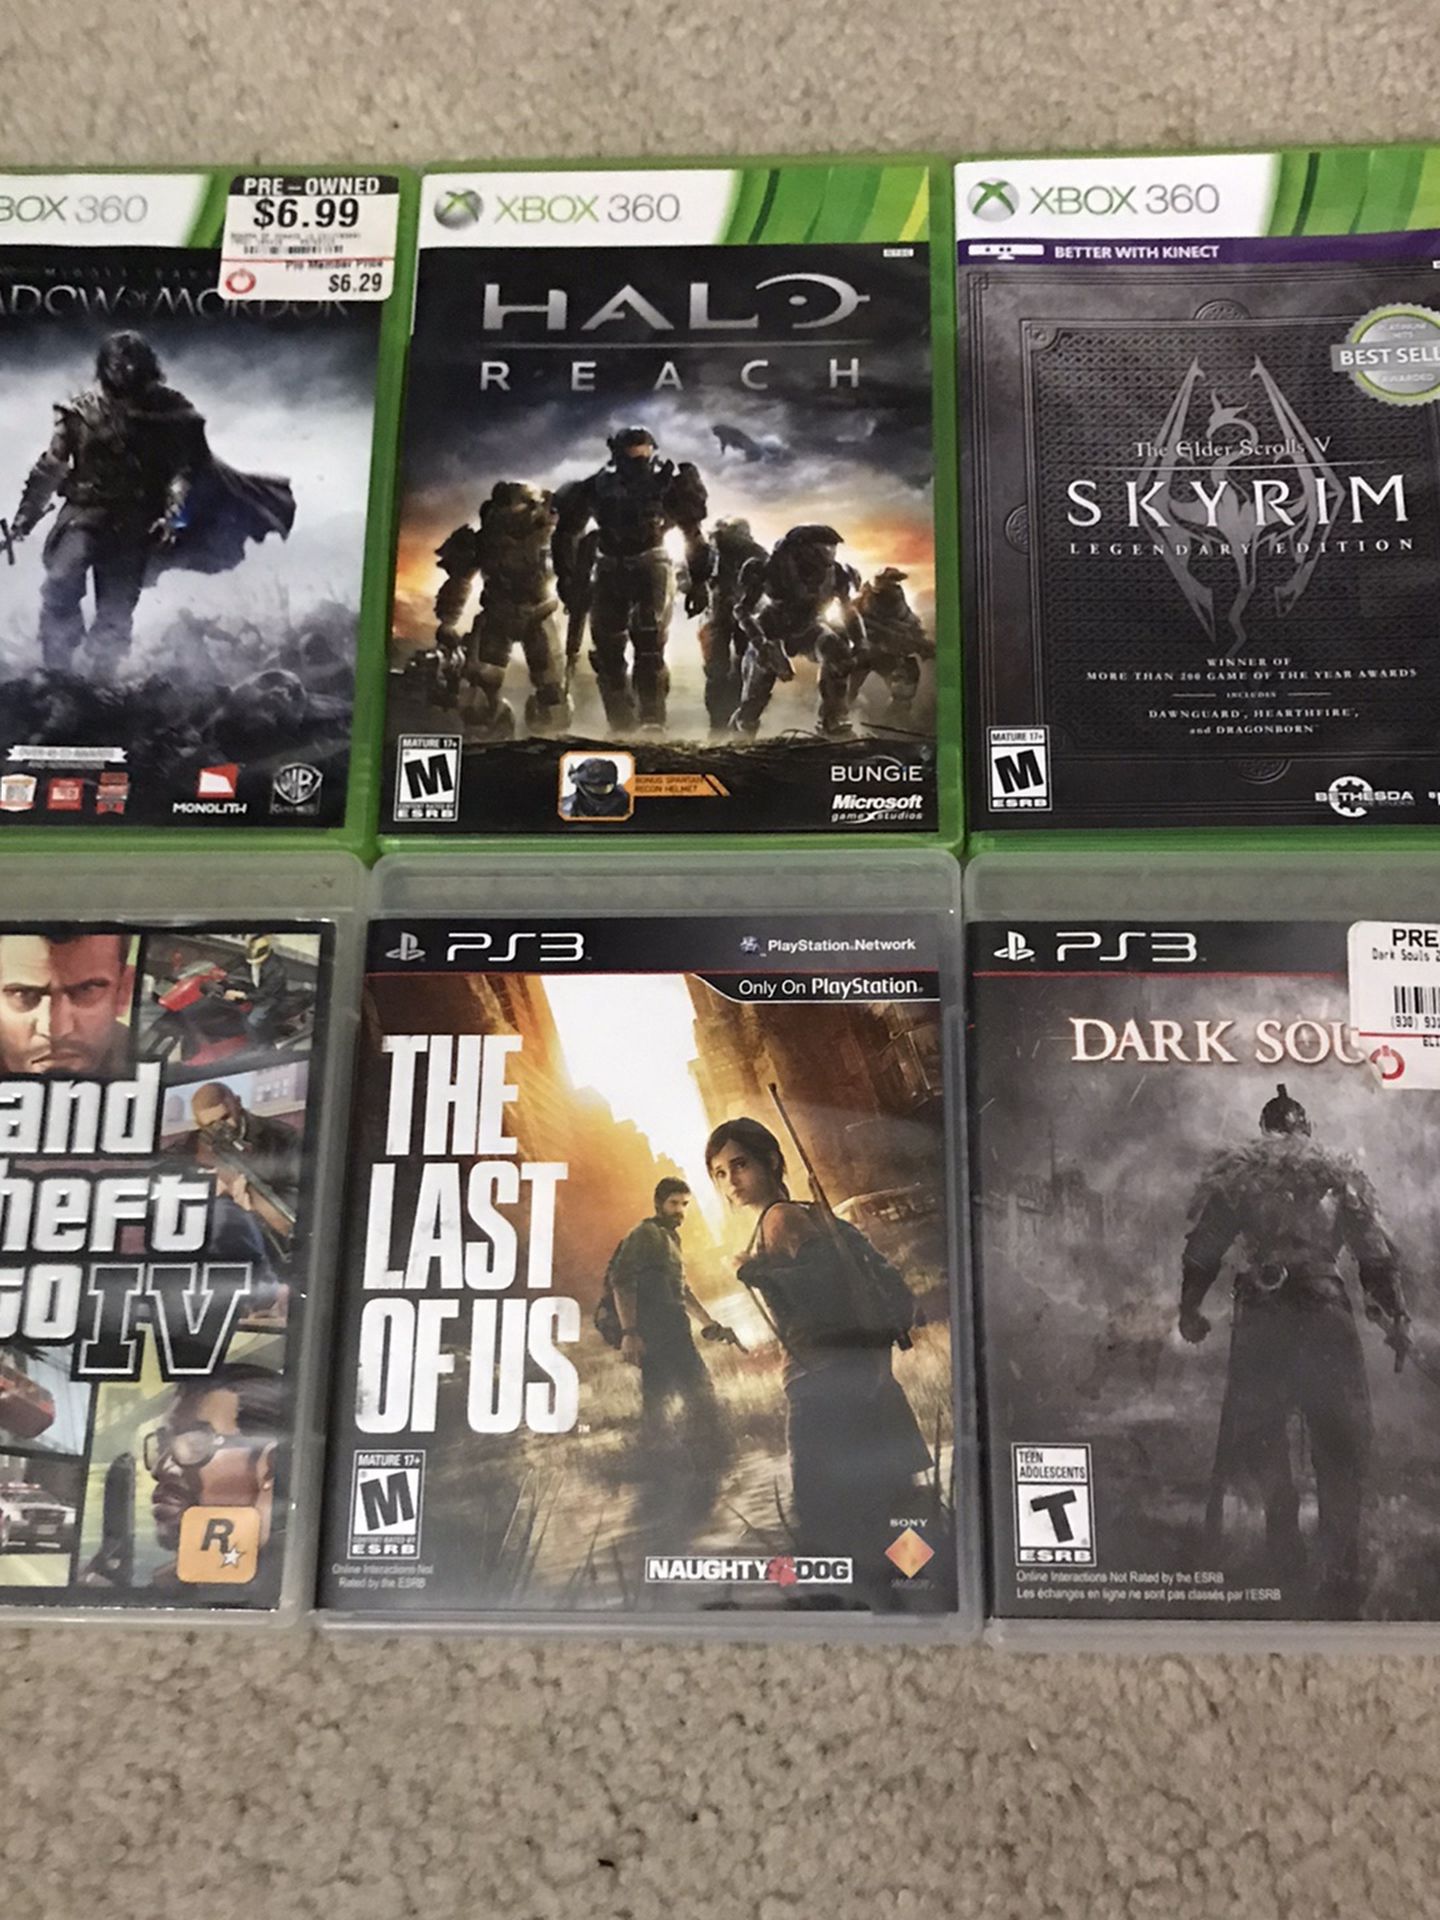 Selling Games & Xbox 360